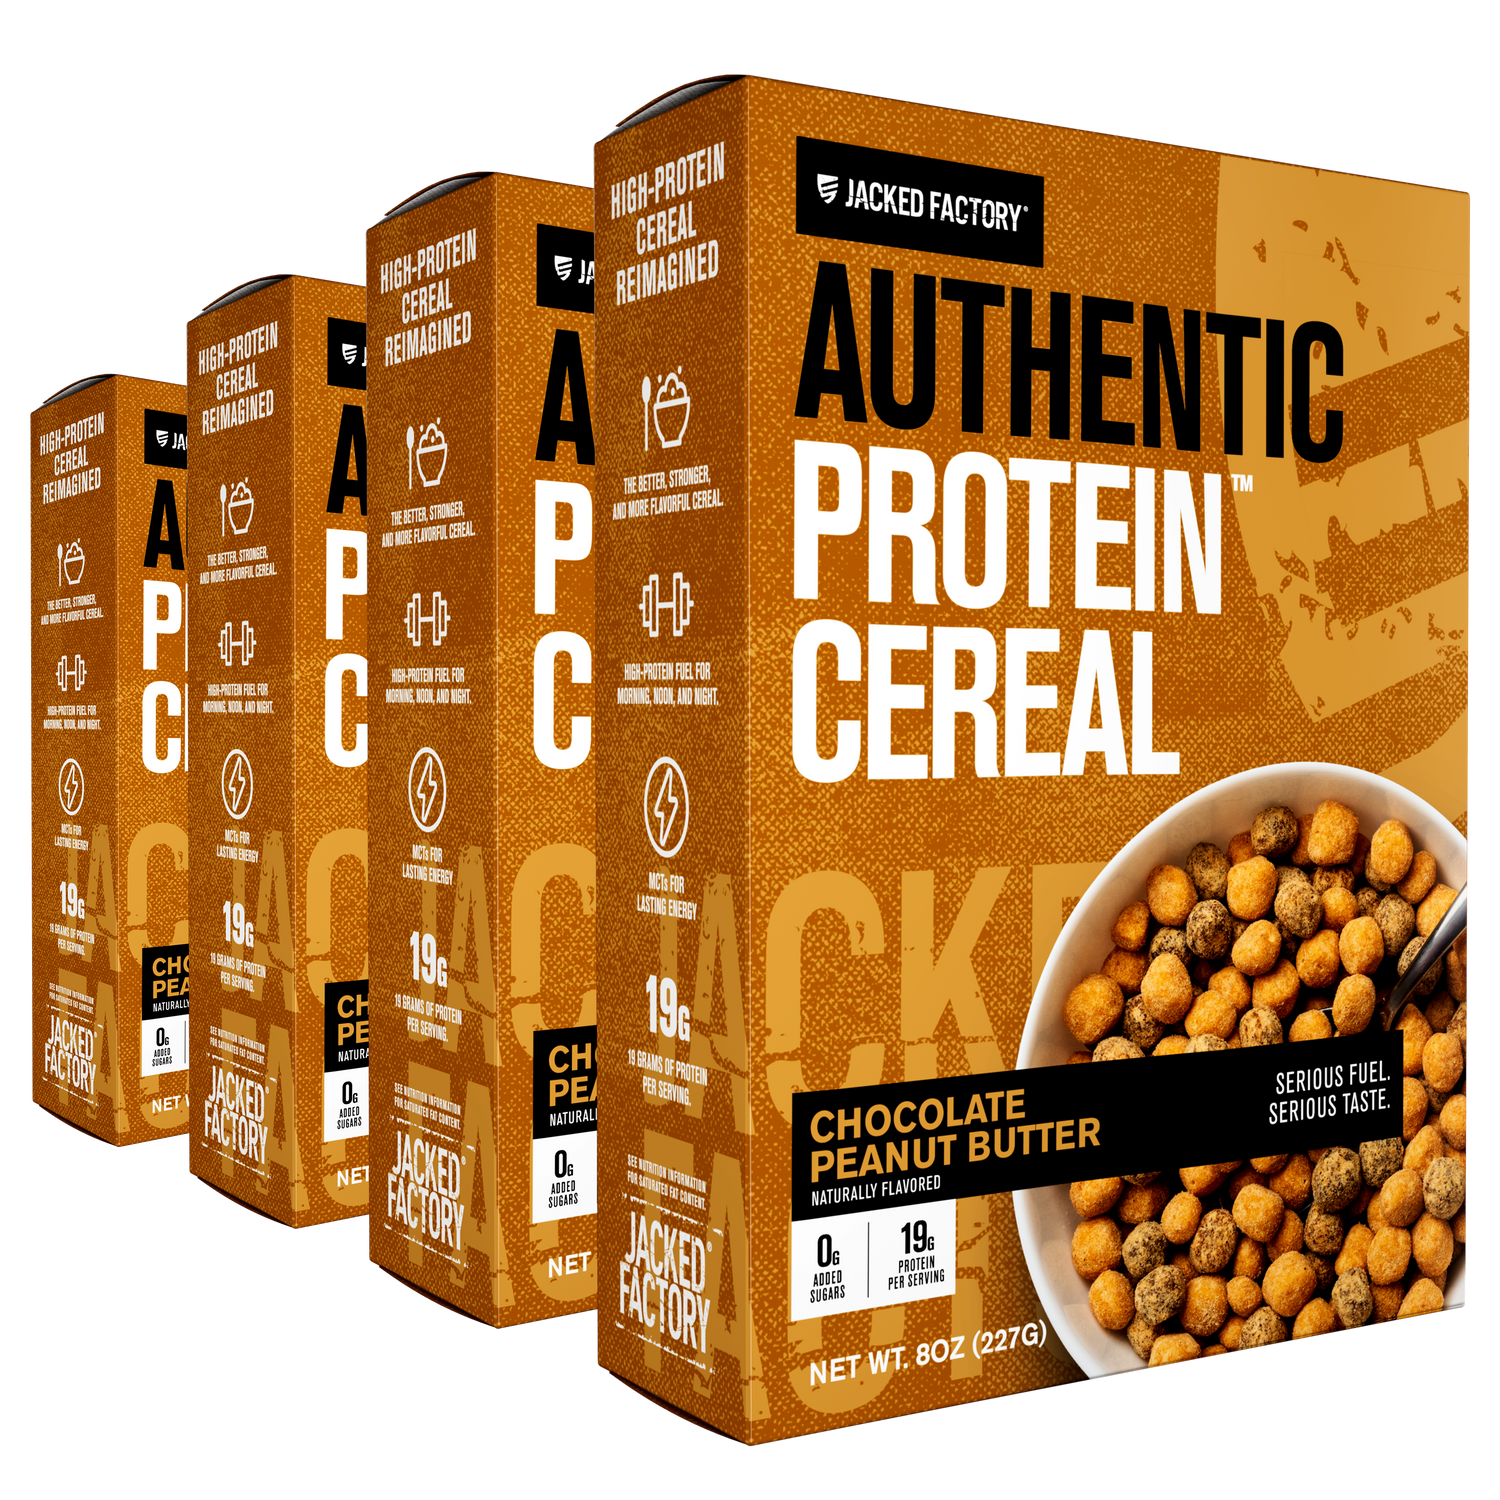 Four Boxes of Jacked Factory Authentic Protein Cereal Chocolate Peanut Butter. Brown cereal boxes with light brown accents black and white text